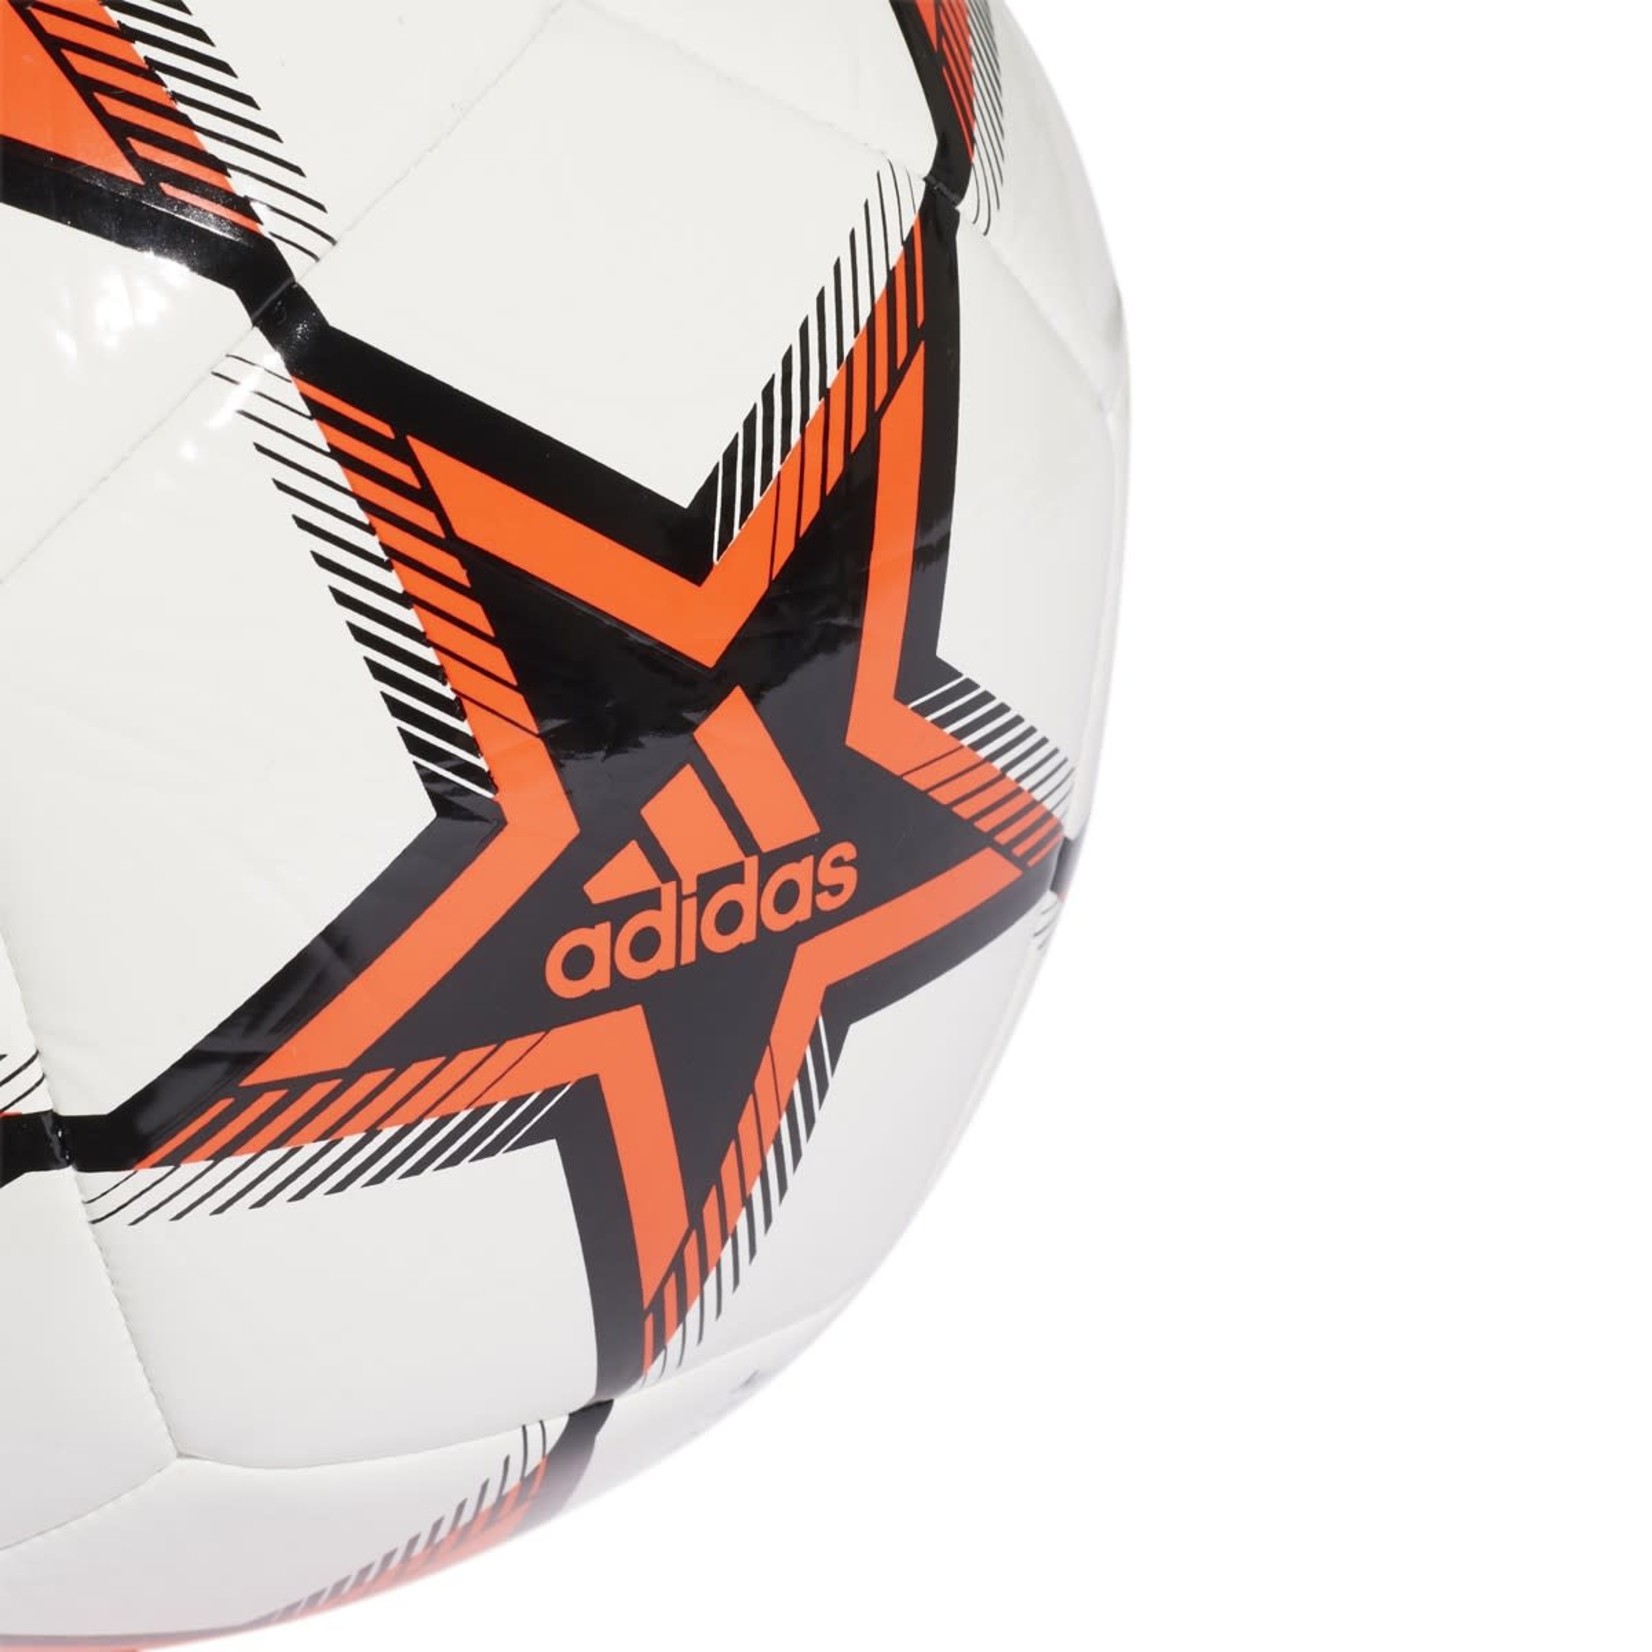 ADIDAS FINALE 21 UCL CLUB PYROSTORM BALL (WHITE/RED)